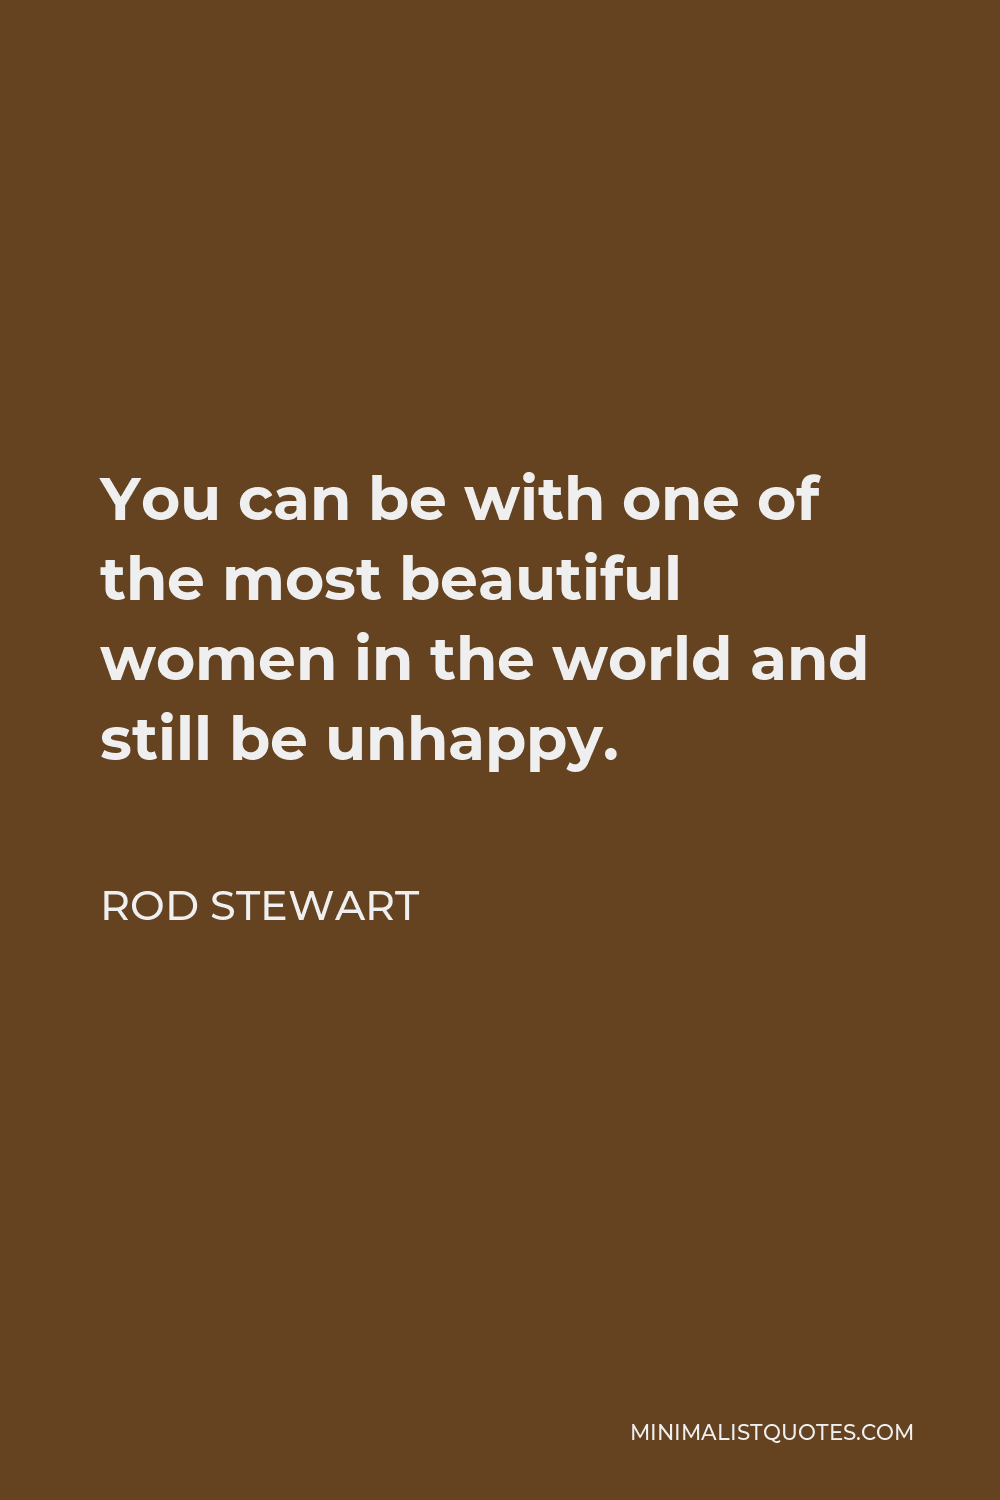 Rod Stewart Quote - You can be with one of the most beautiful women in the world and still be unhappy.